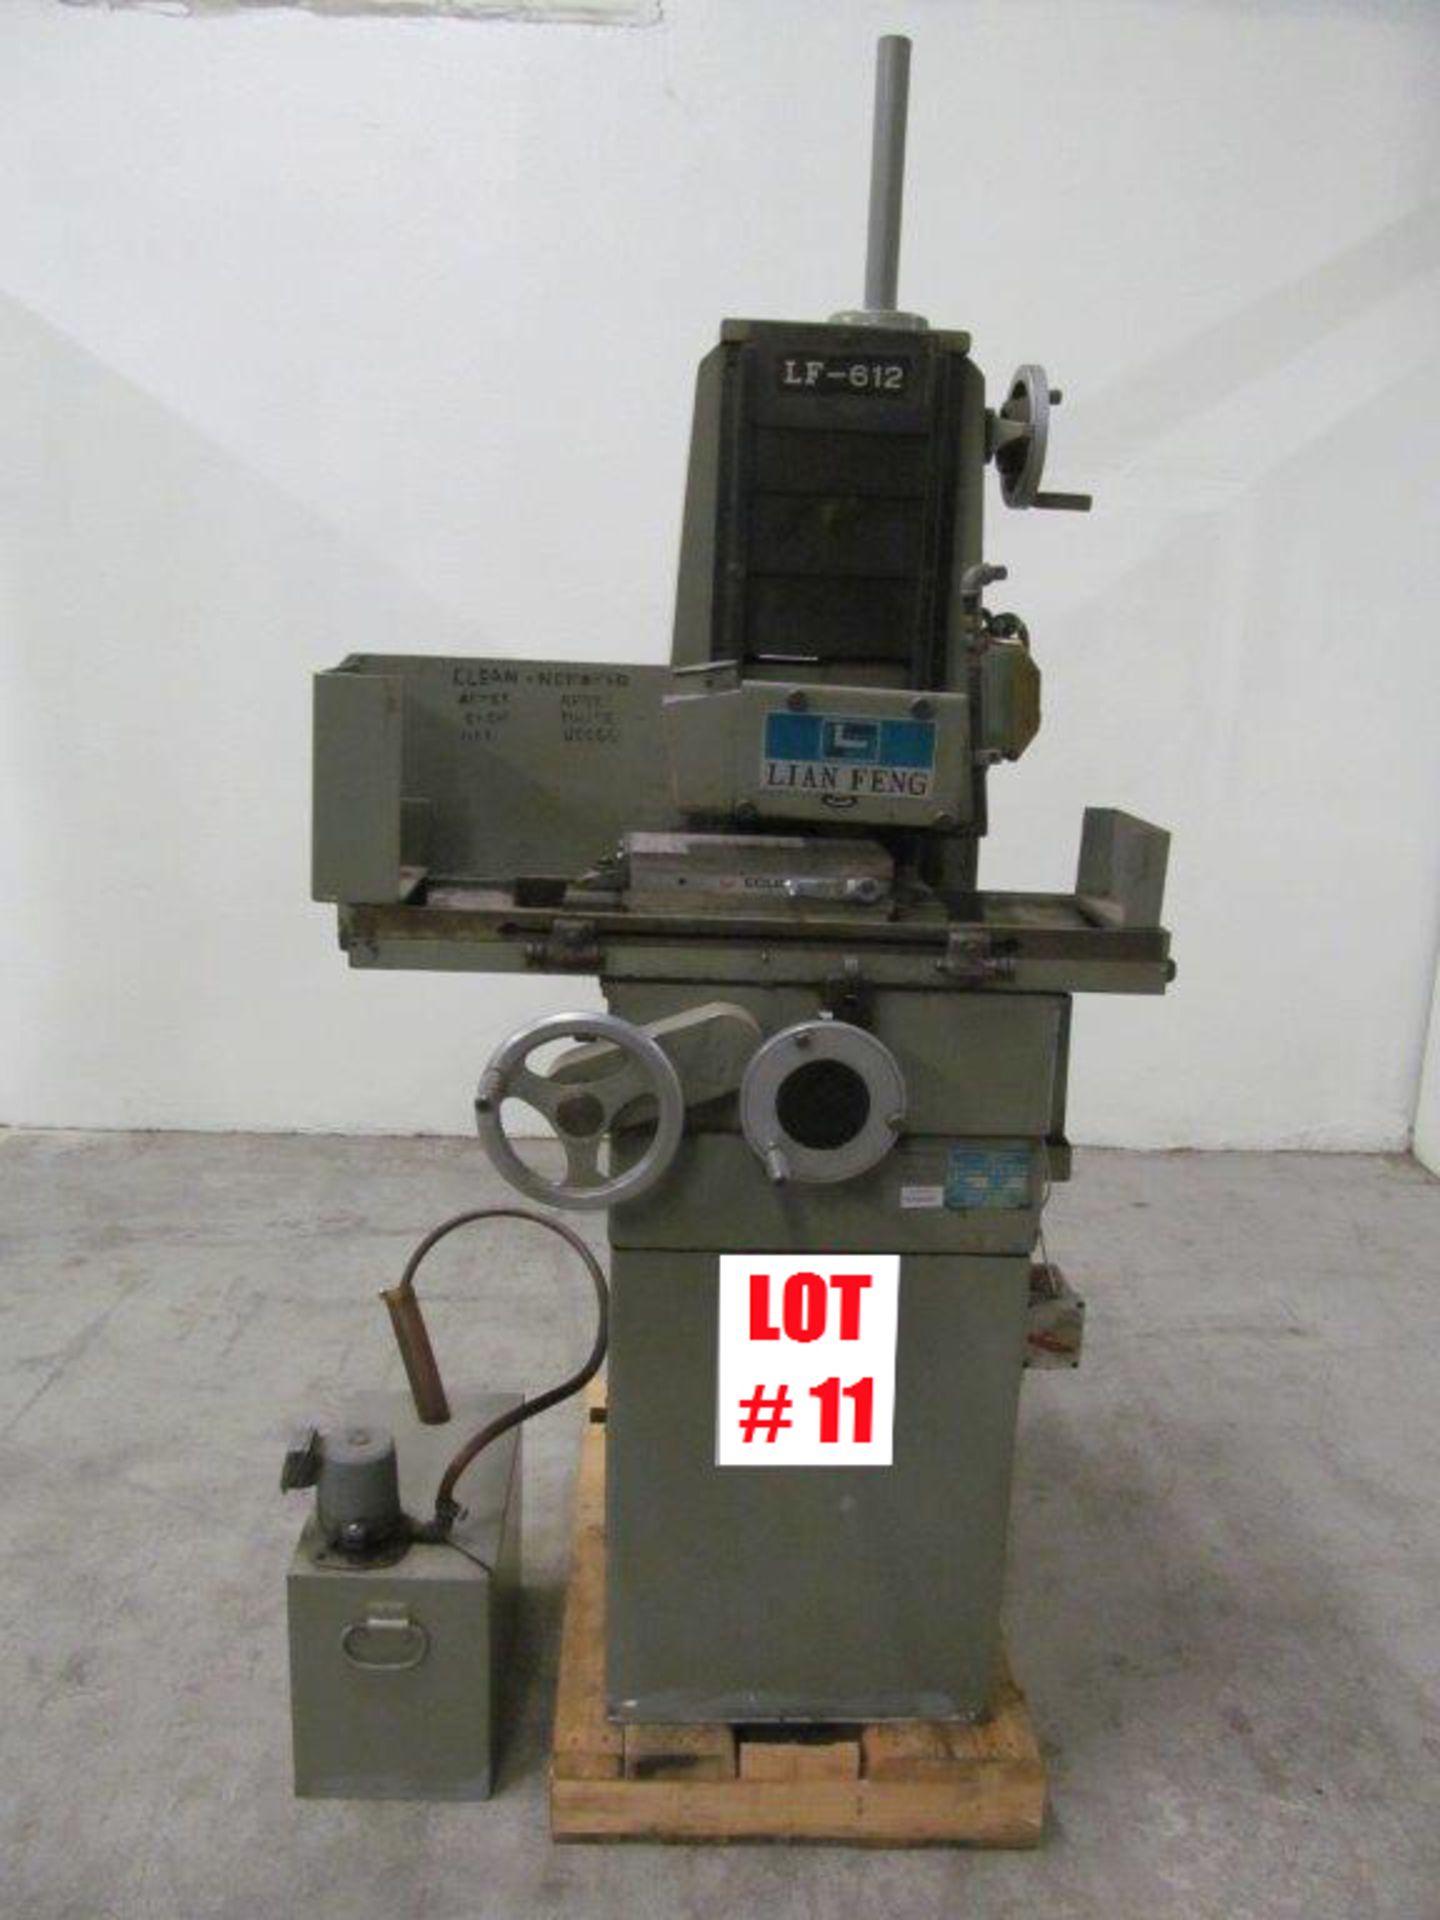 LIAN FENG HYDRAULIC SURFACE GRINDER MODEL LF-12, S/N: 73332, CAPACITY: 6" X 12" C/W ECLIPSE MAGNETIC - Image 2 of 4